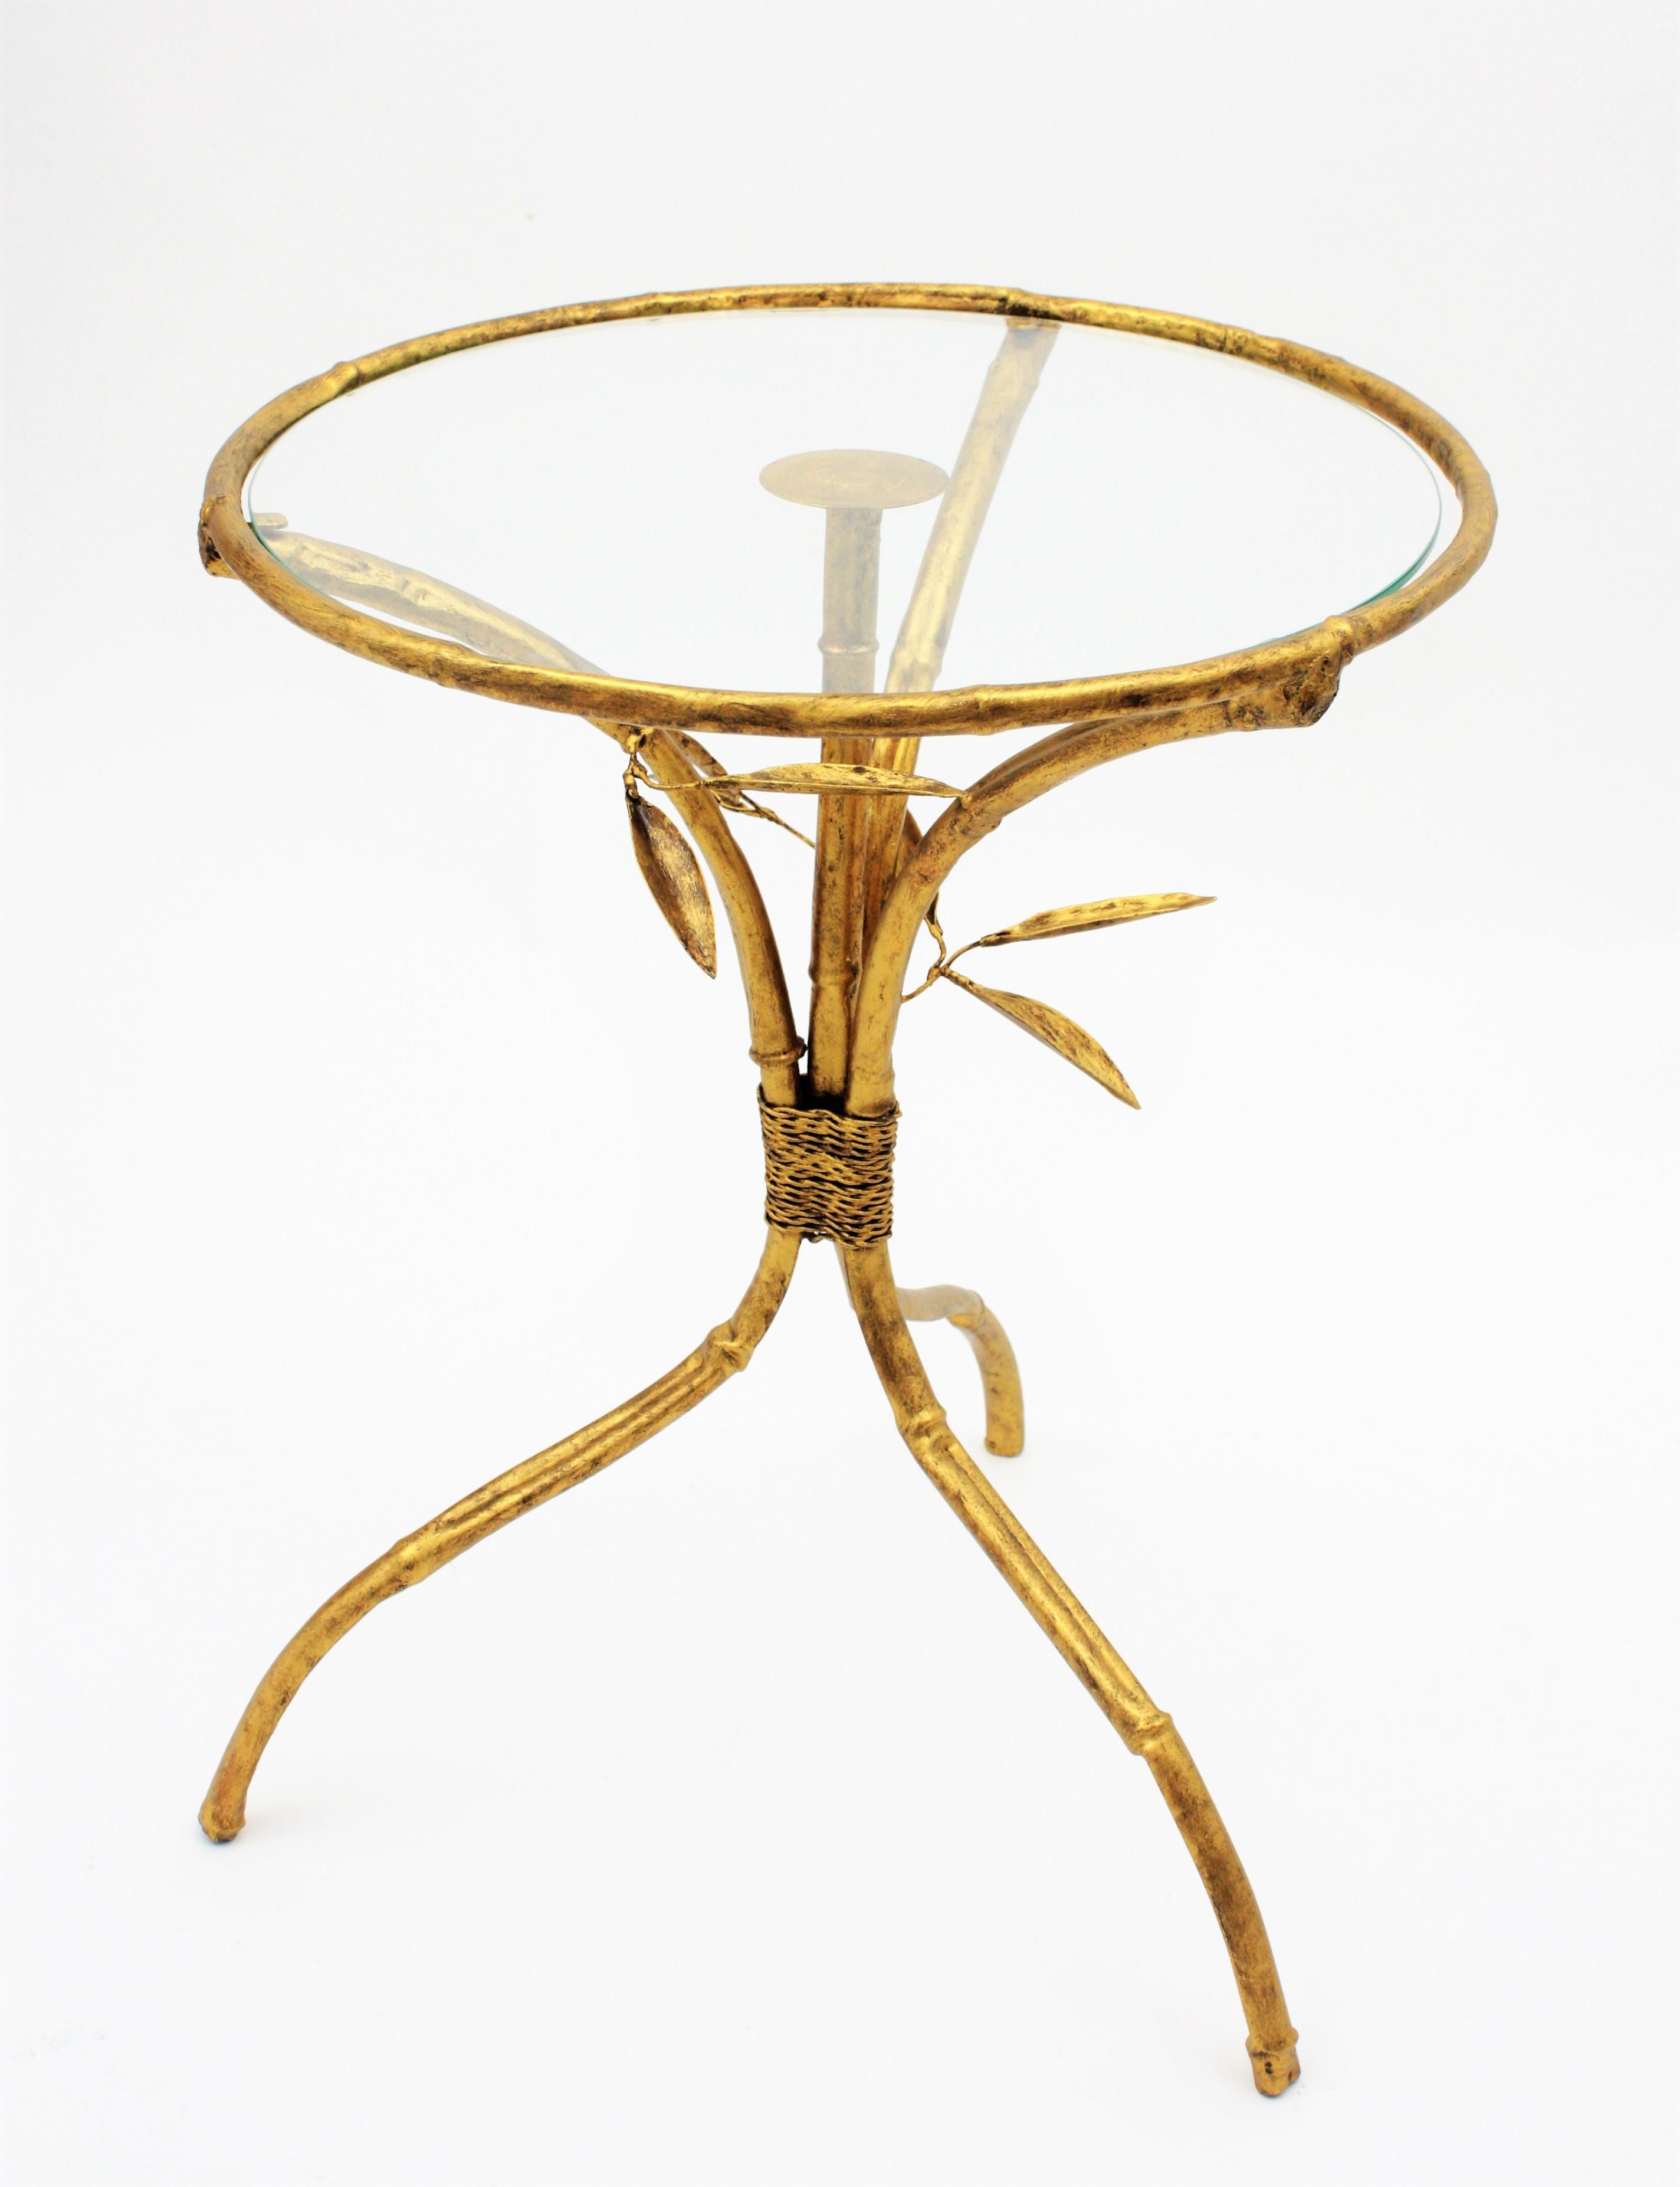 Eye-catching Hollywood Regency gilt iron faux bamboo gueridon drinks table with foliage details, Spain, 1950s. 
This beautiful round table stands up on three legs with a beautiful faux bamboo design. Leaf decorations and rope details joining its